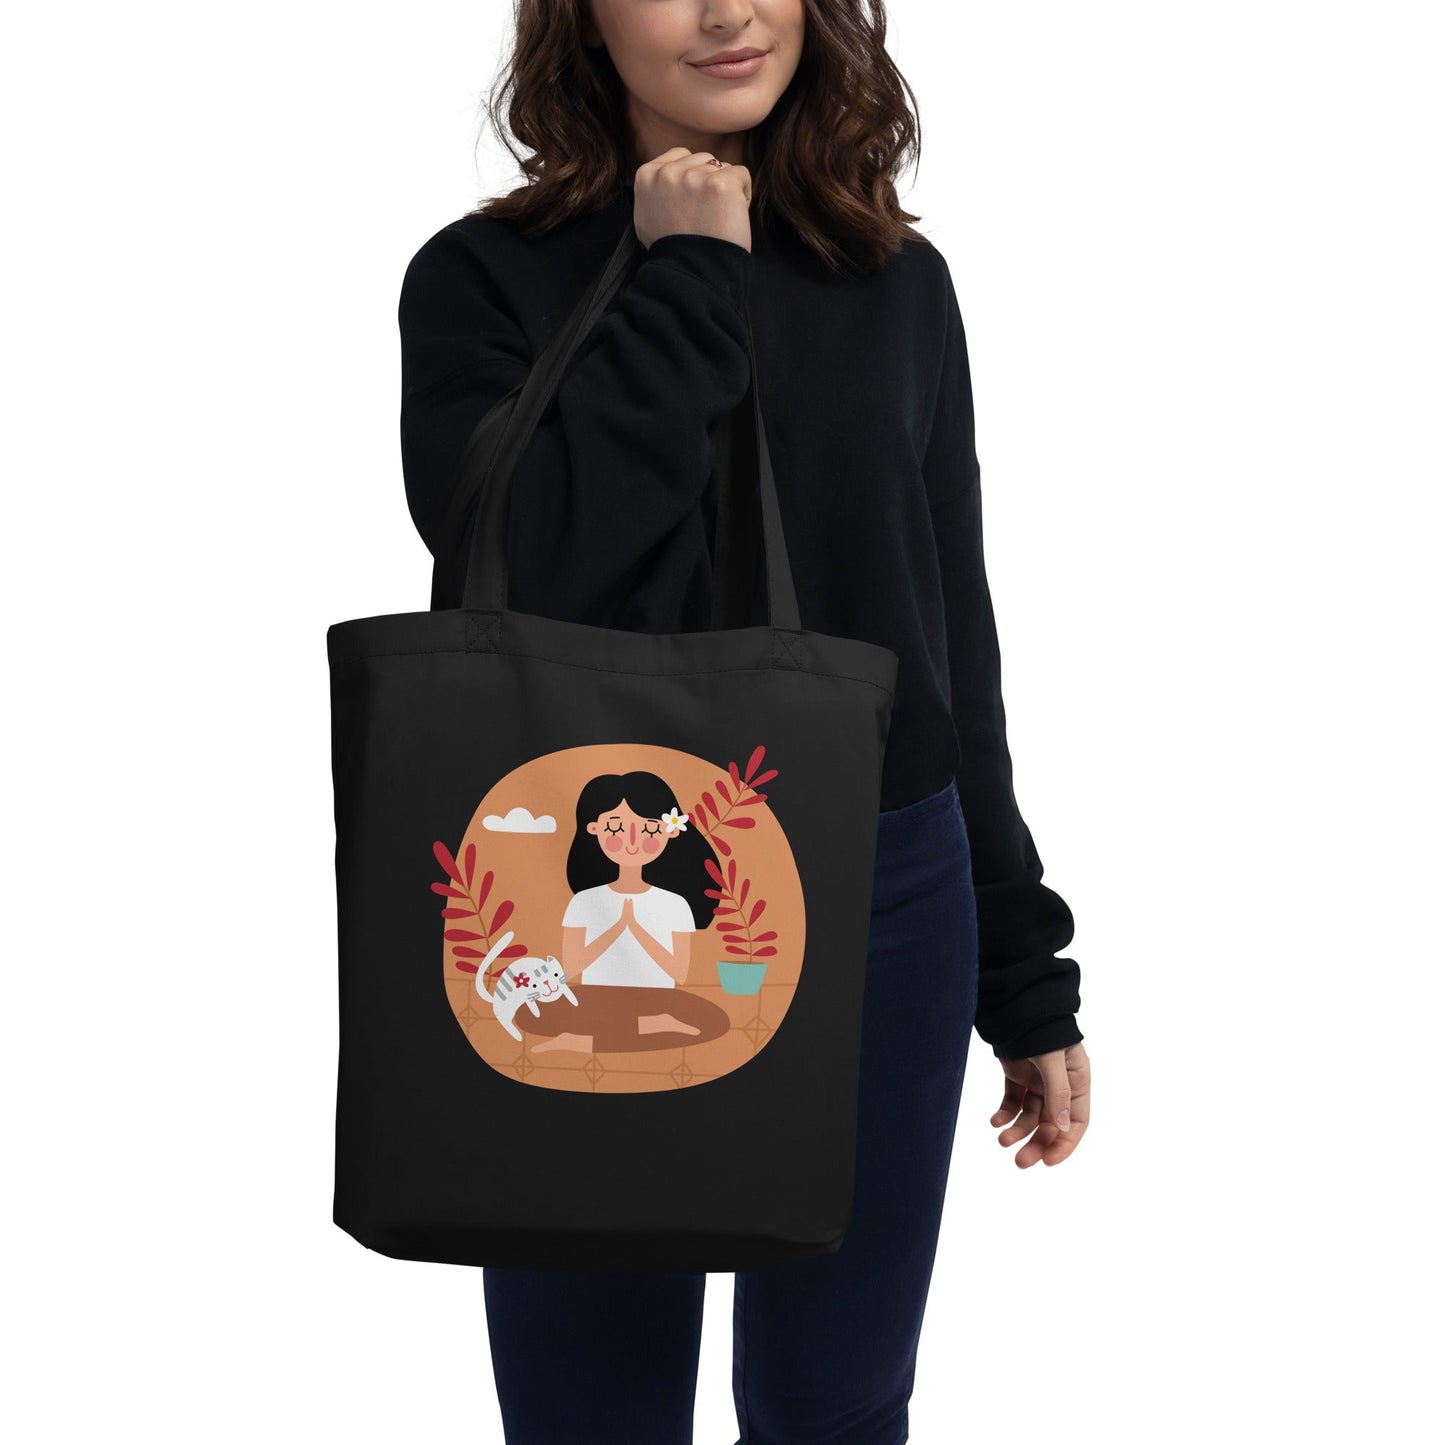 shopping-tote-bag-never-be-alone-black